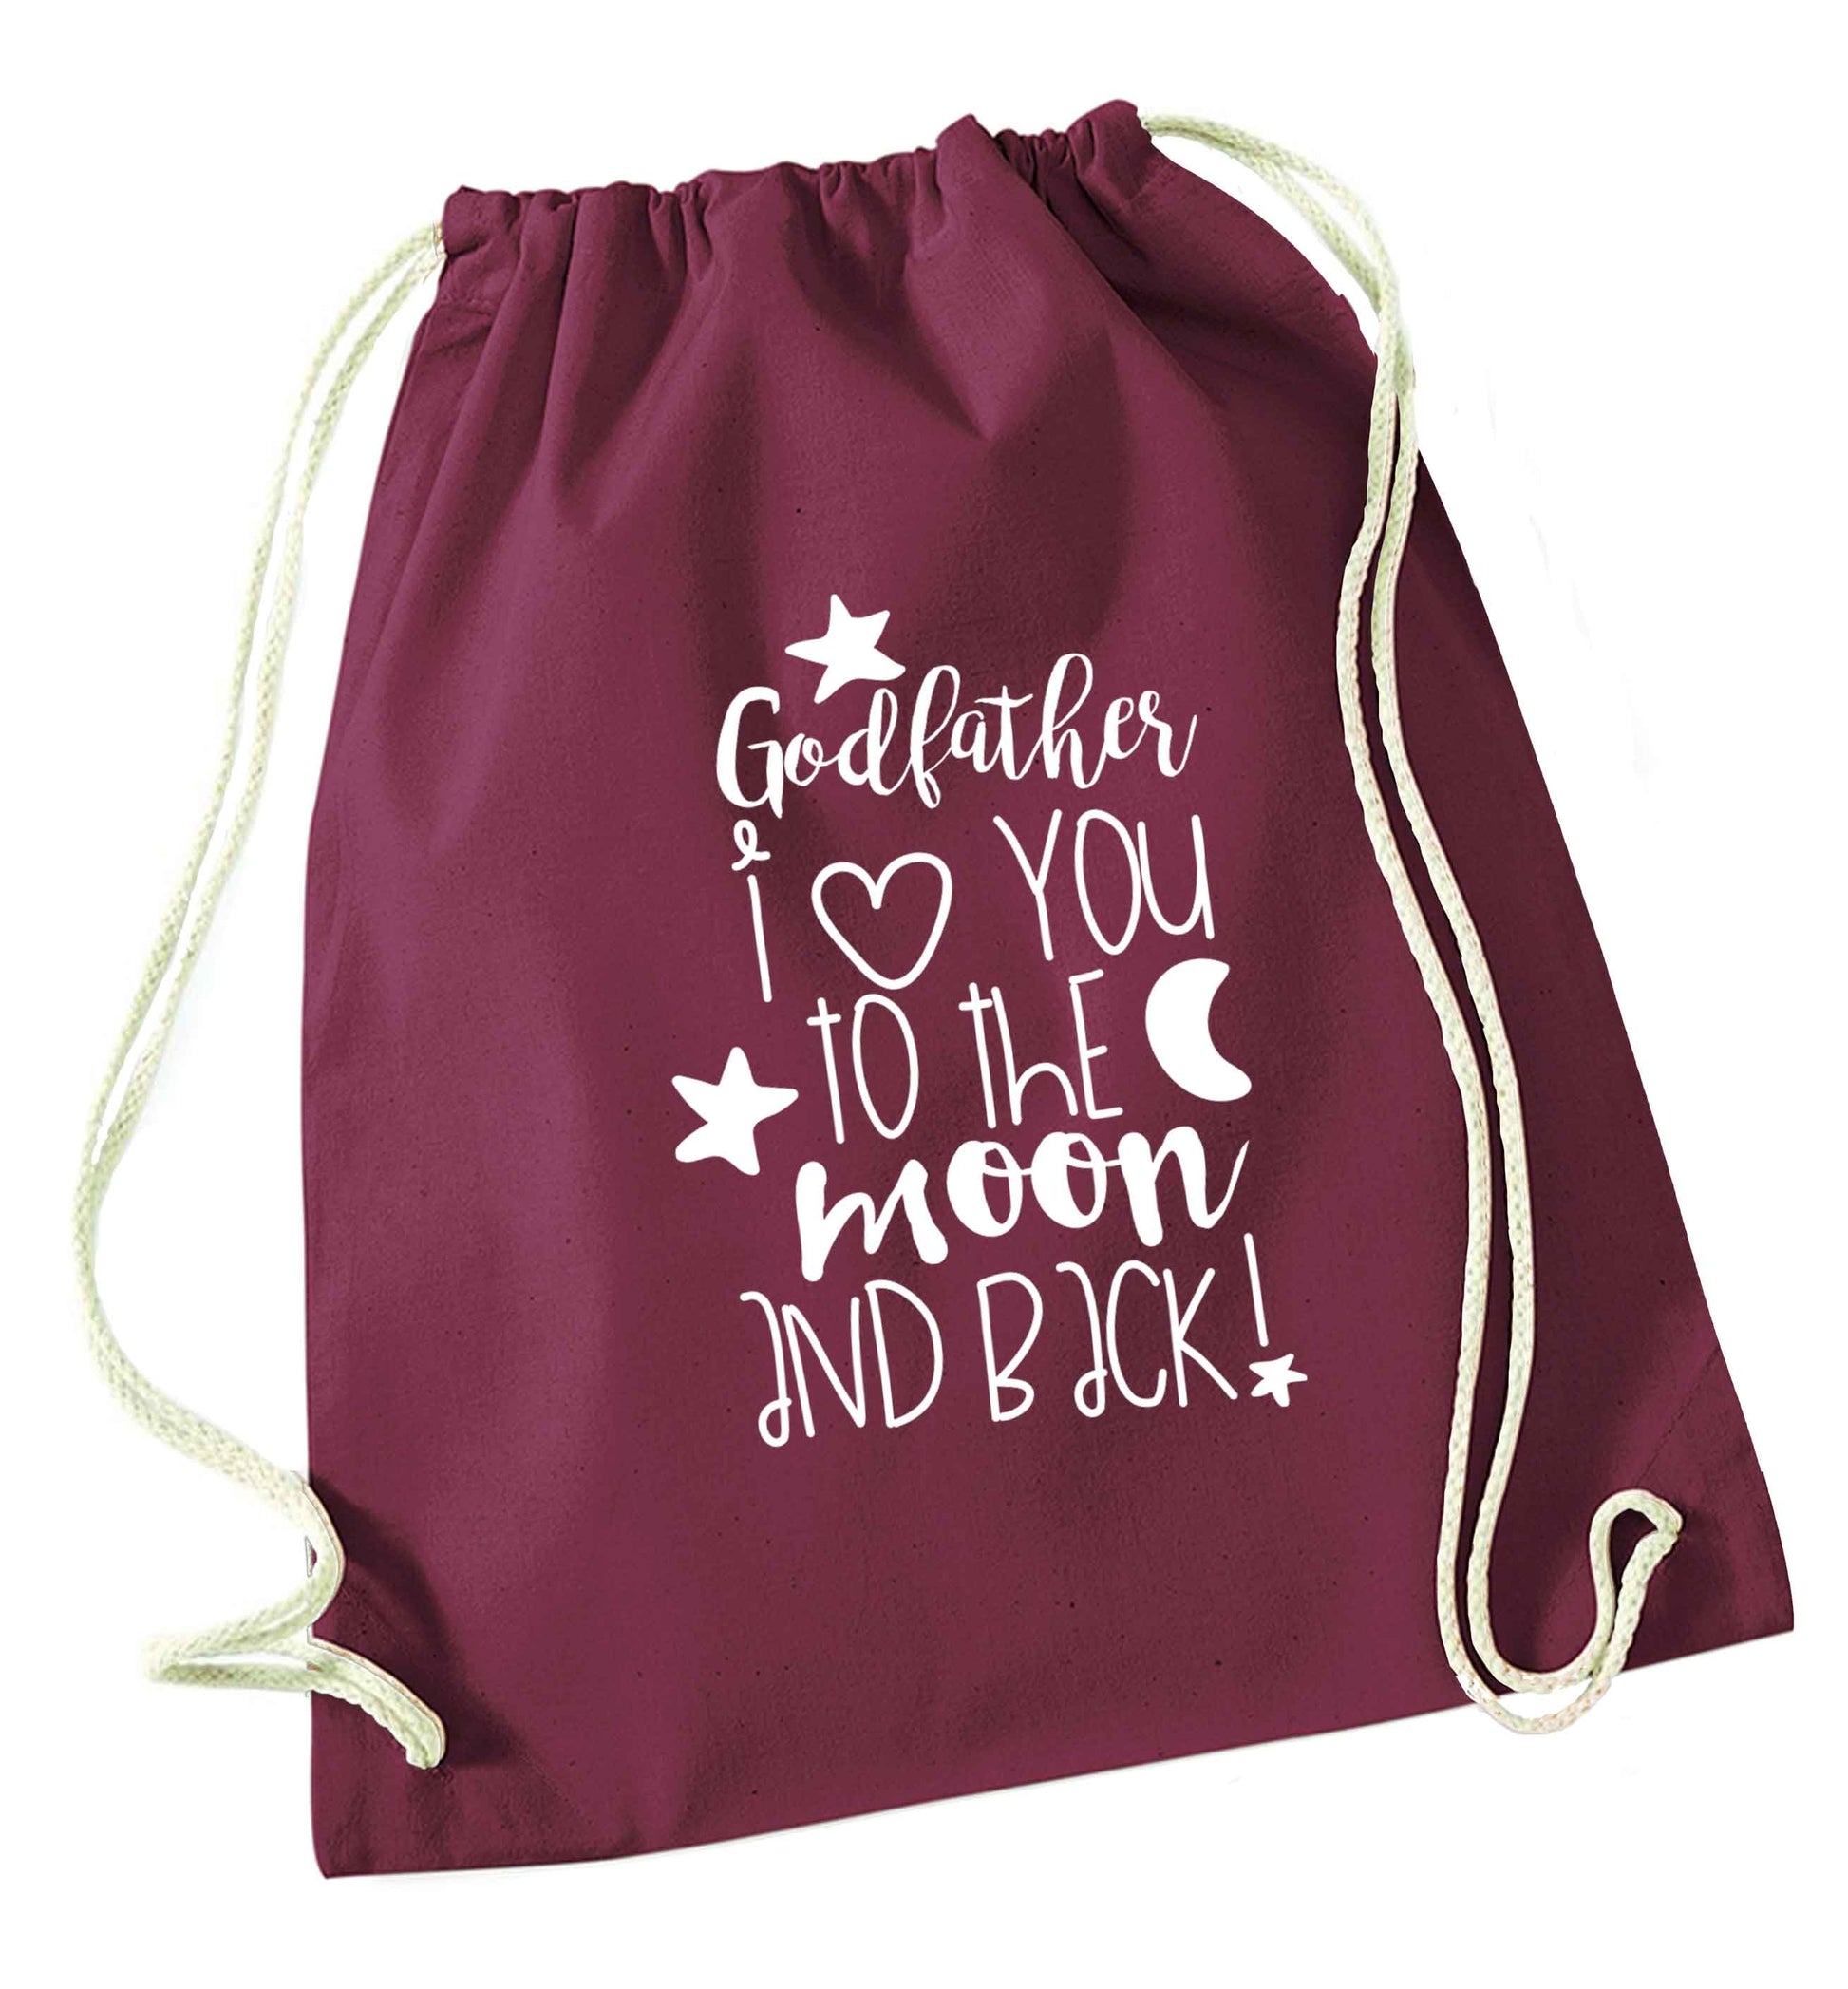 Godfather I love you to the moon and back maroon drawstring bag